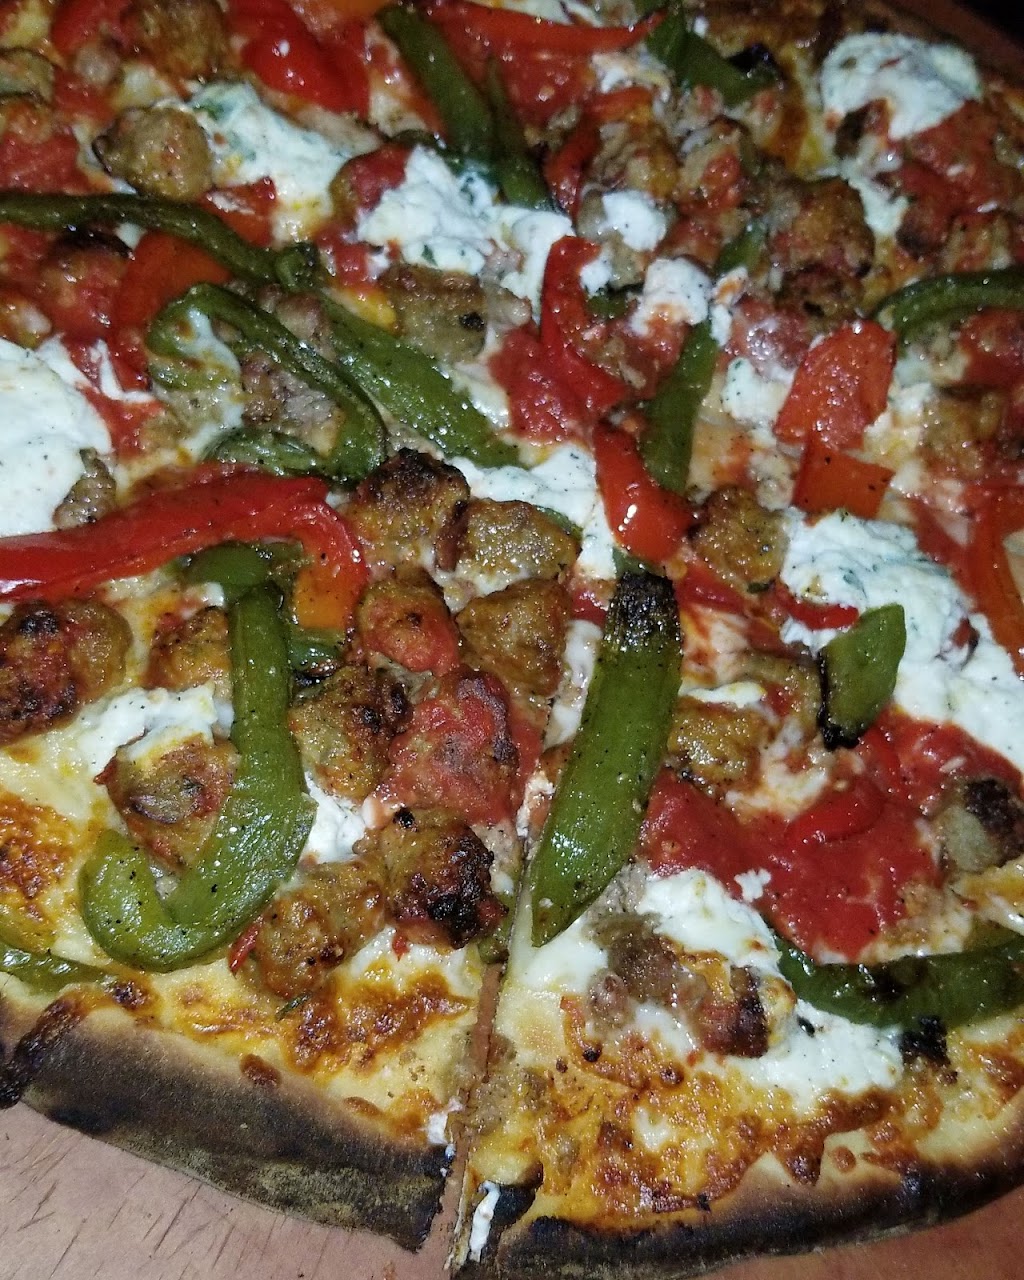 Anthonys Coal Fired Pizza & Wings | 50 E Wynnewood Rd, Wynnewood, PA 19096 | Phone: (610) 645-5453